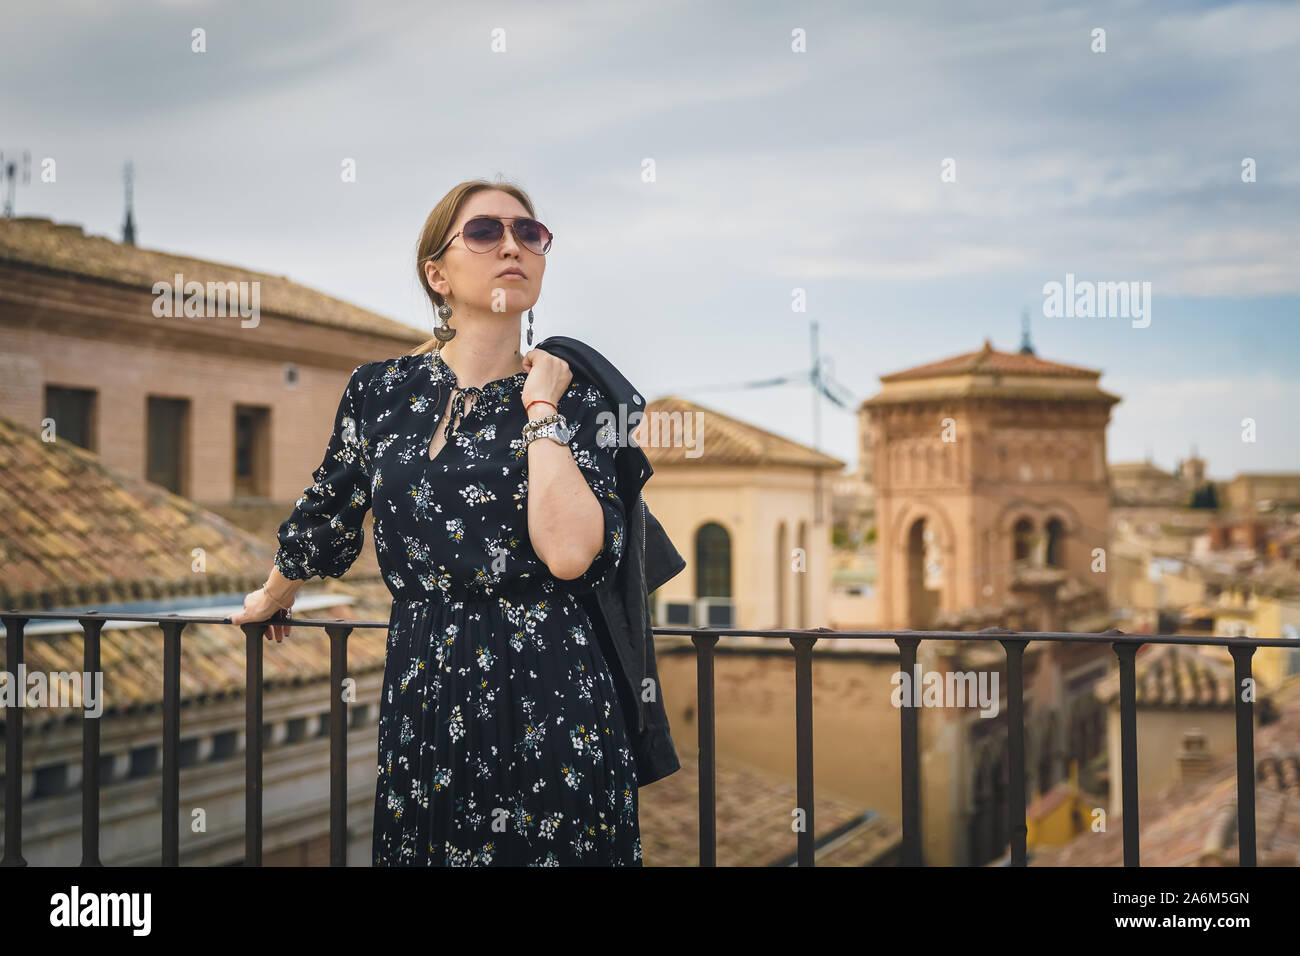 Stylish woman posing in the old part of the town against tile roofs. Medieval city of Toledo in the center of Spain. Stock Photo